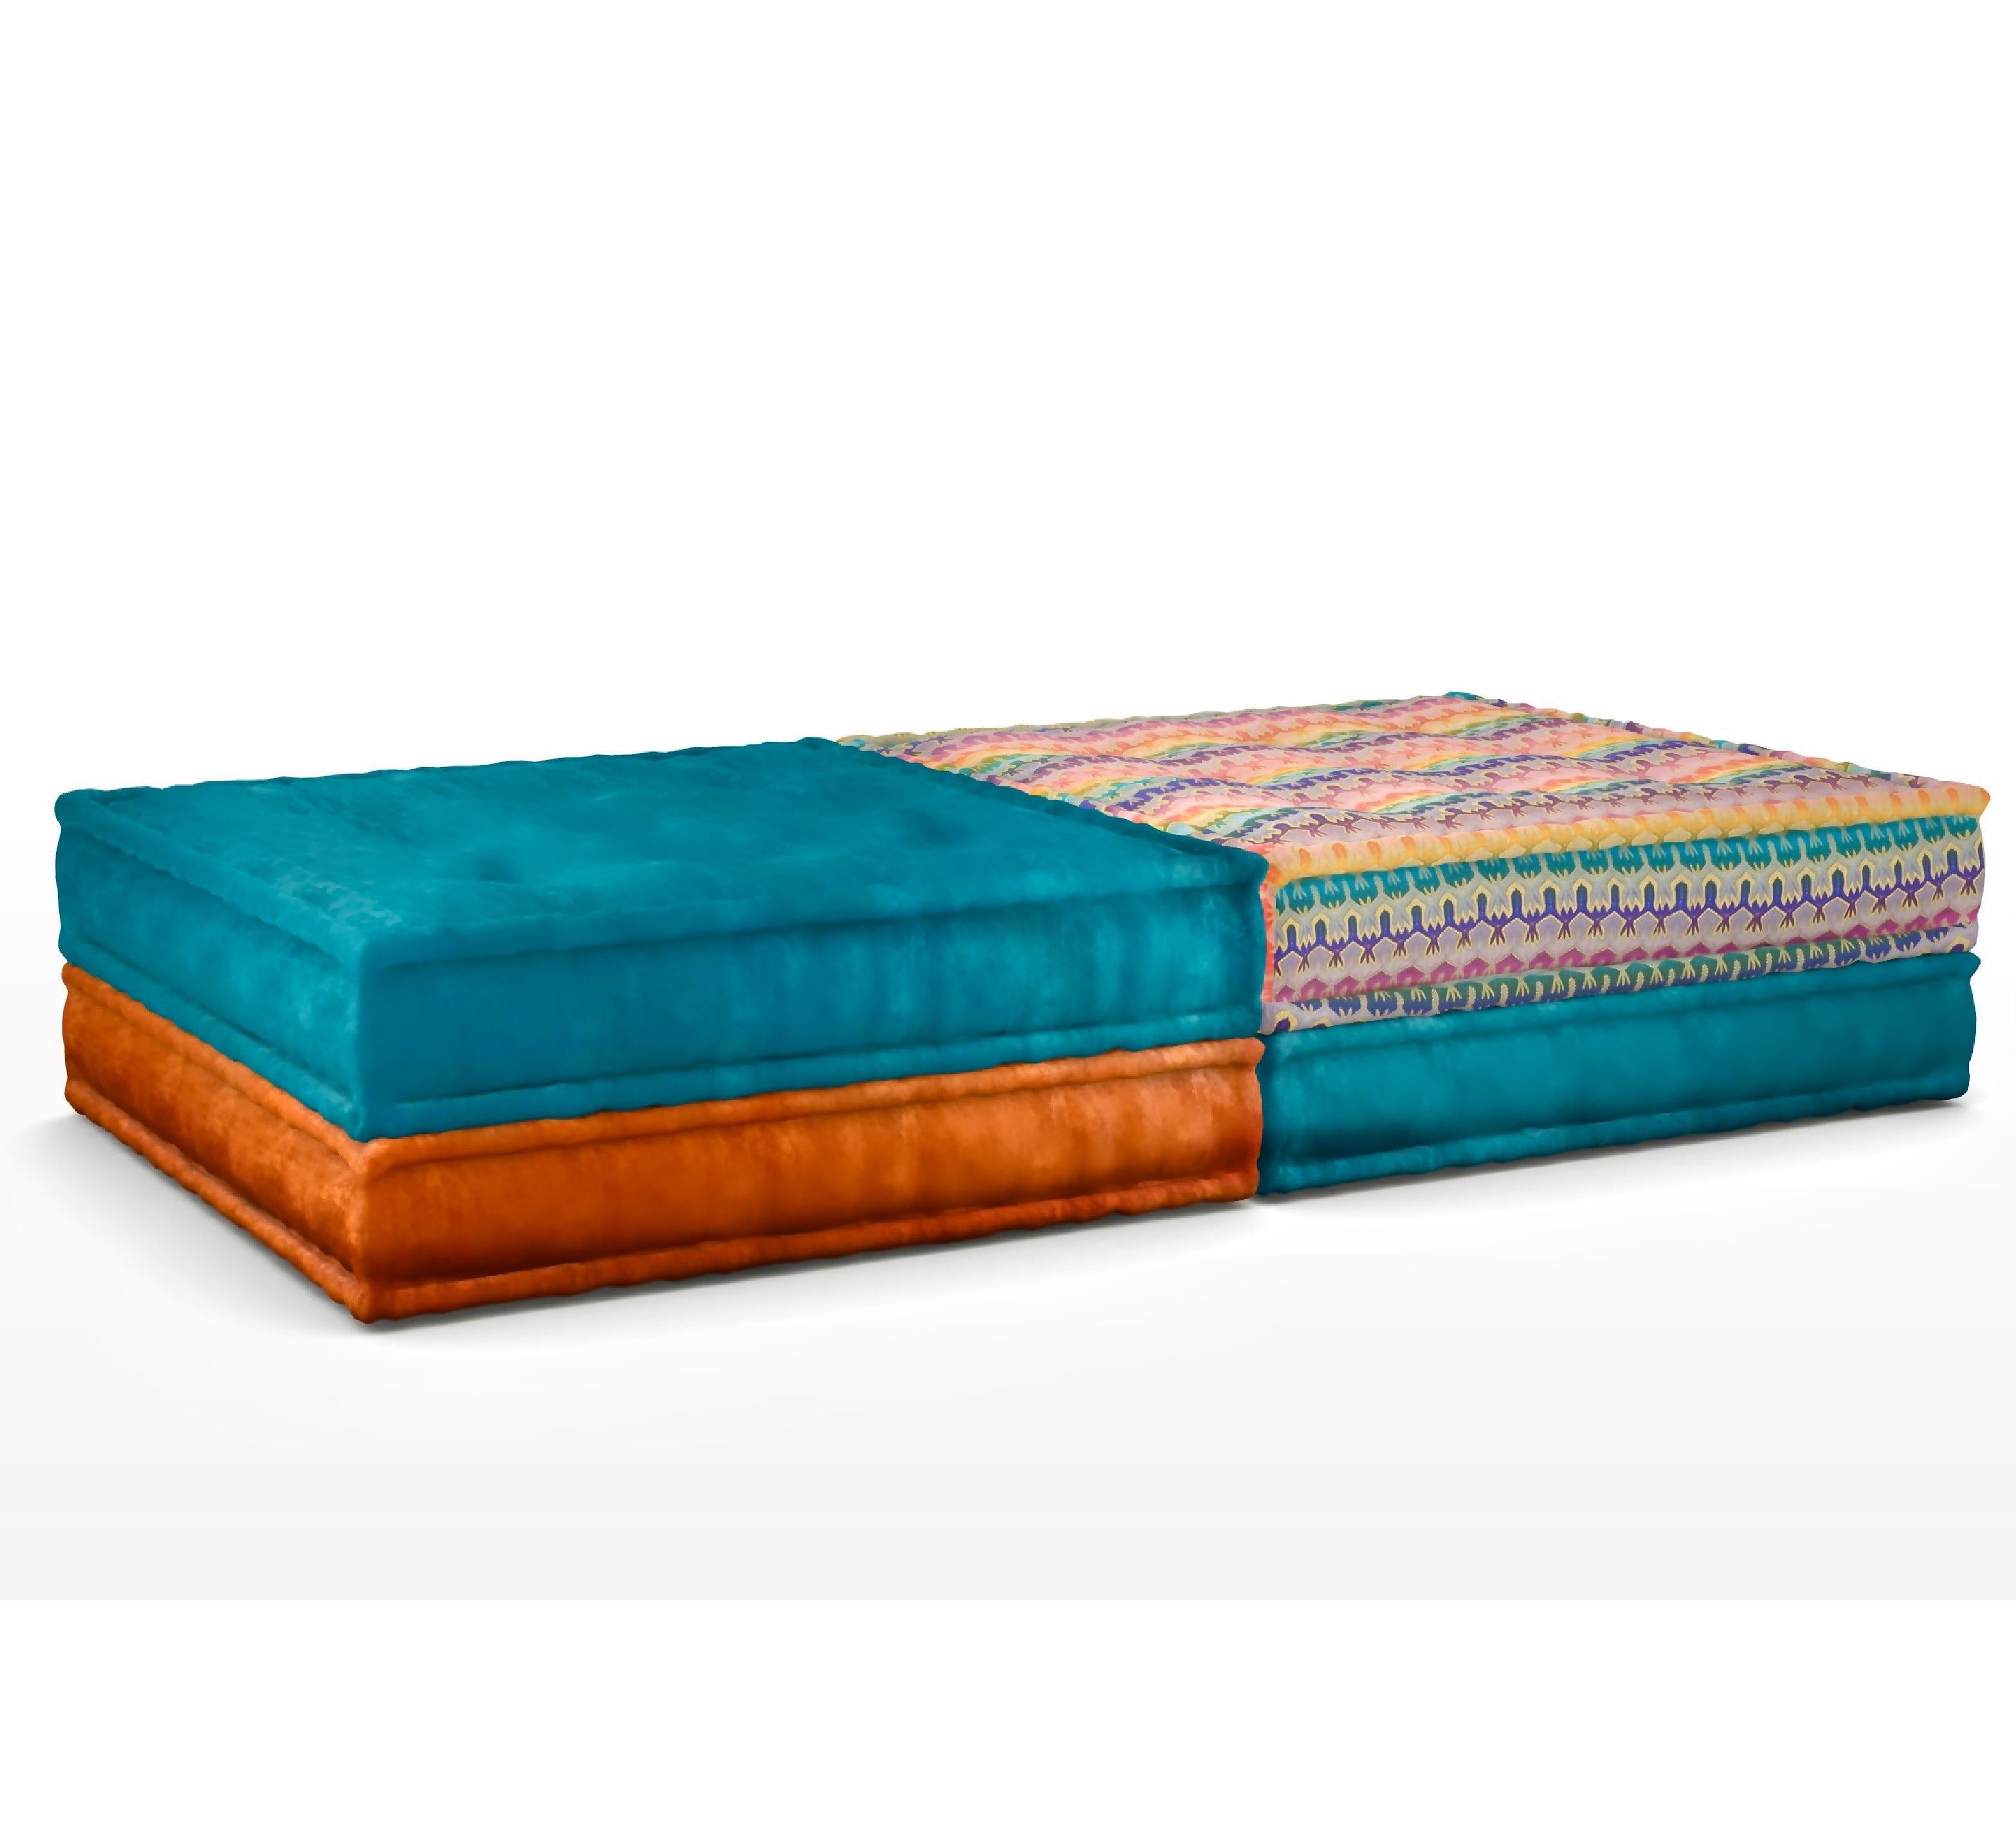 Le Mah Jong Modular Missoni multi color daybed, Ottoman, Roche Bobois, 2015. 

Mah-Jong modular sofa set by Hans Hopfer, designed in 1971 for Roche Bobois and a textile from the house of Missoni. Hopfer’s Mah Jong is one of the most iconic